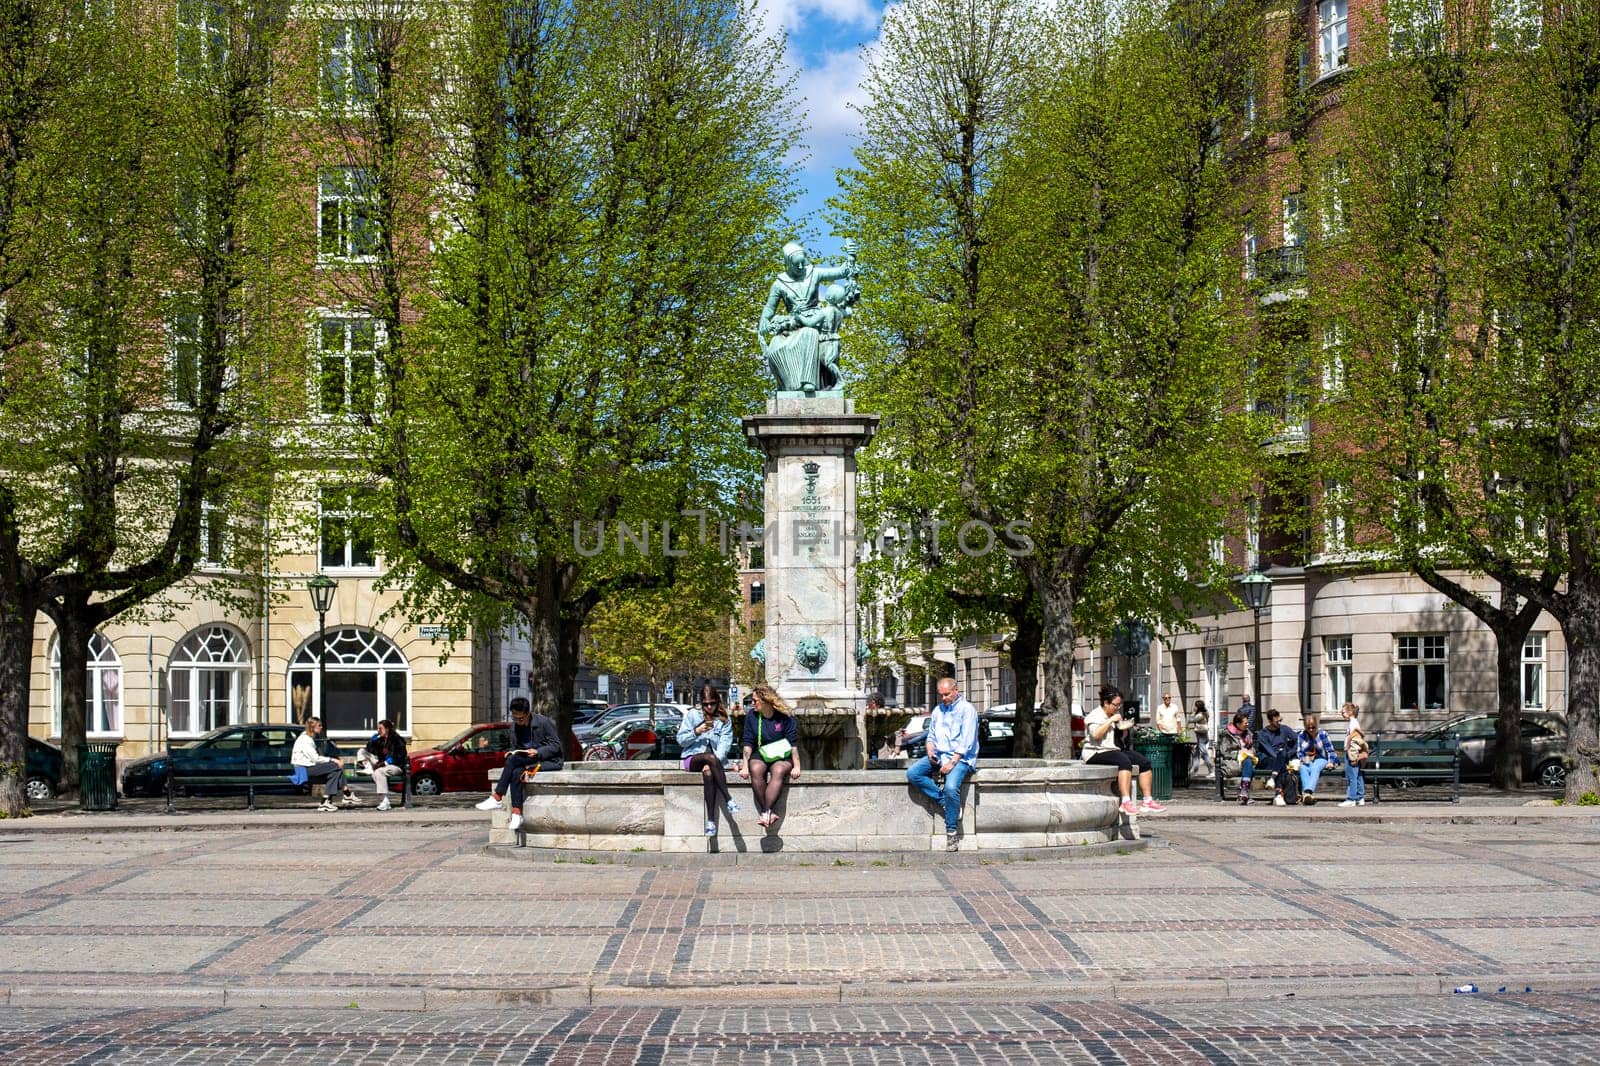 Frederiksberg, Denmark - May 7, 2022: Historic fountain and people on Sankt Thomas Plaza.